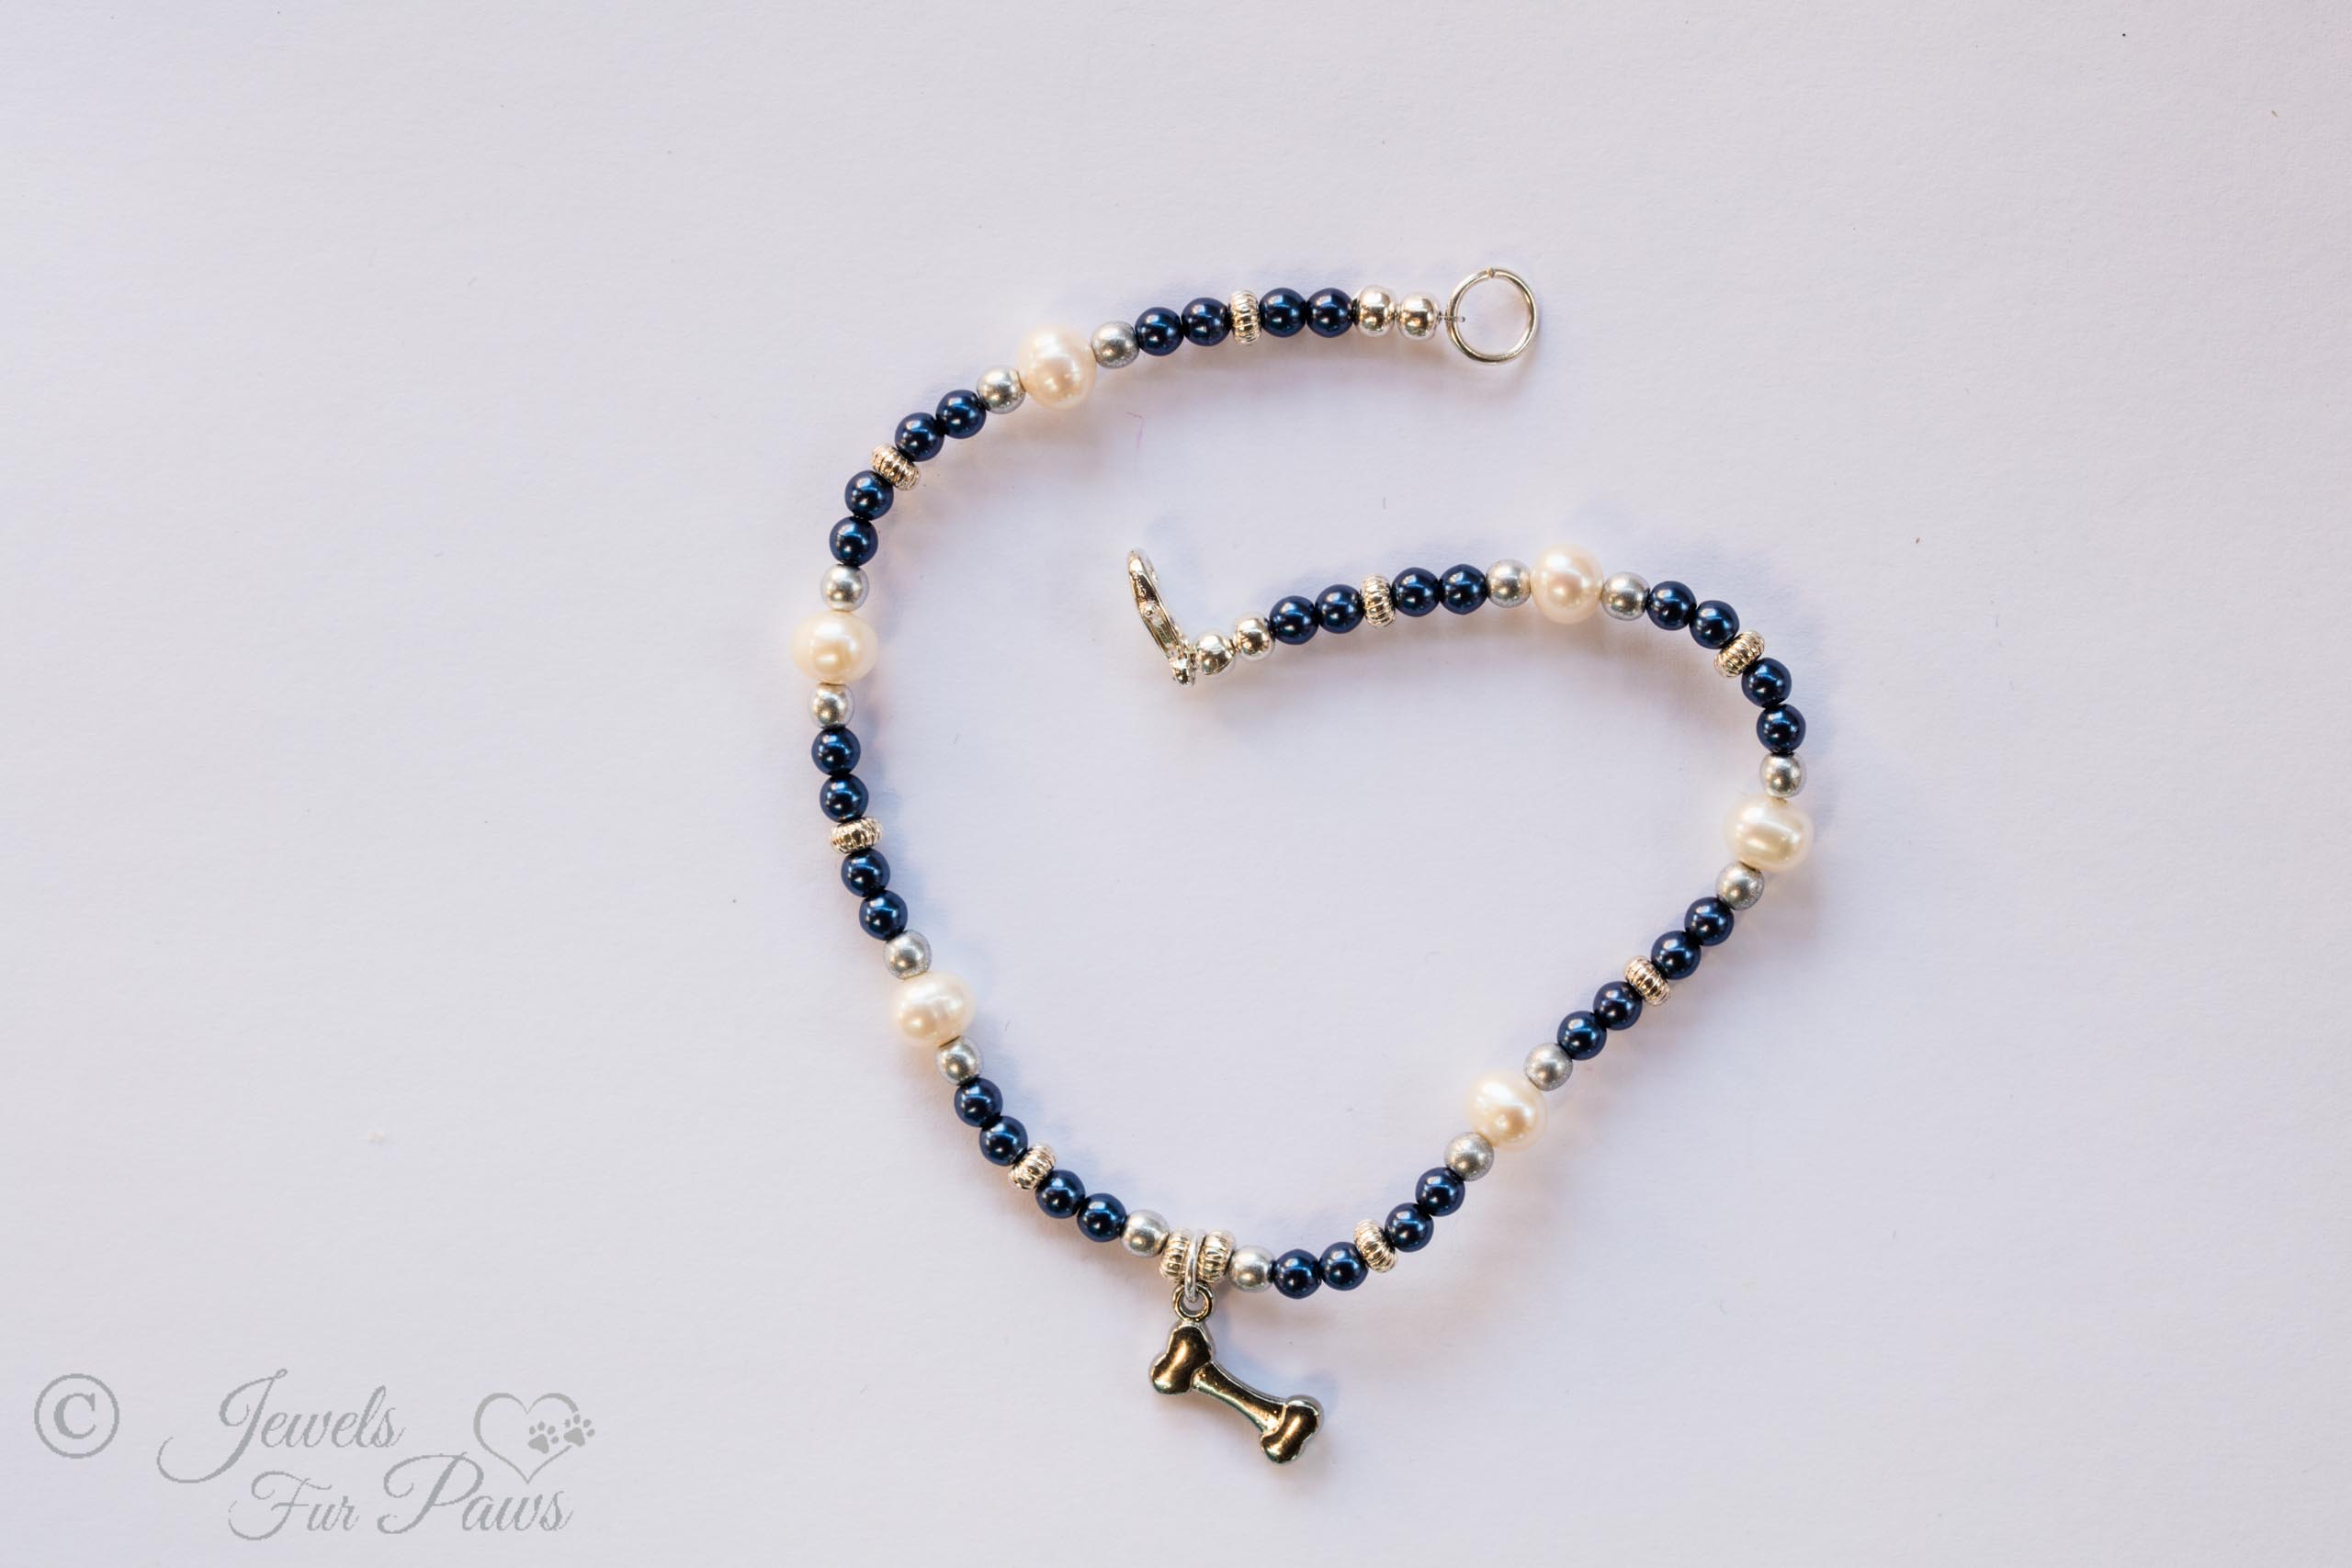 cat dog pet necklace for small dogs or cats navy blue and silver beads with cultured pearls and hanging silver dog bone charm on white background